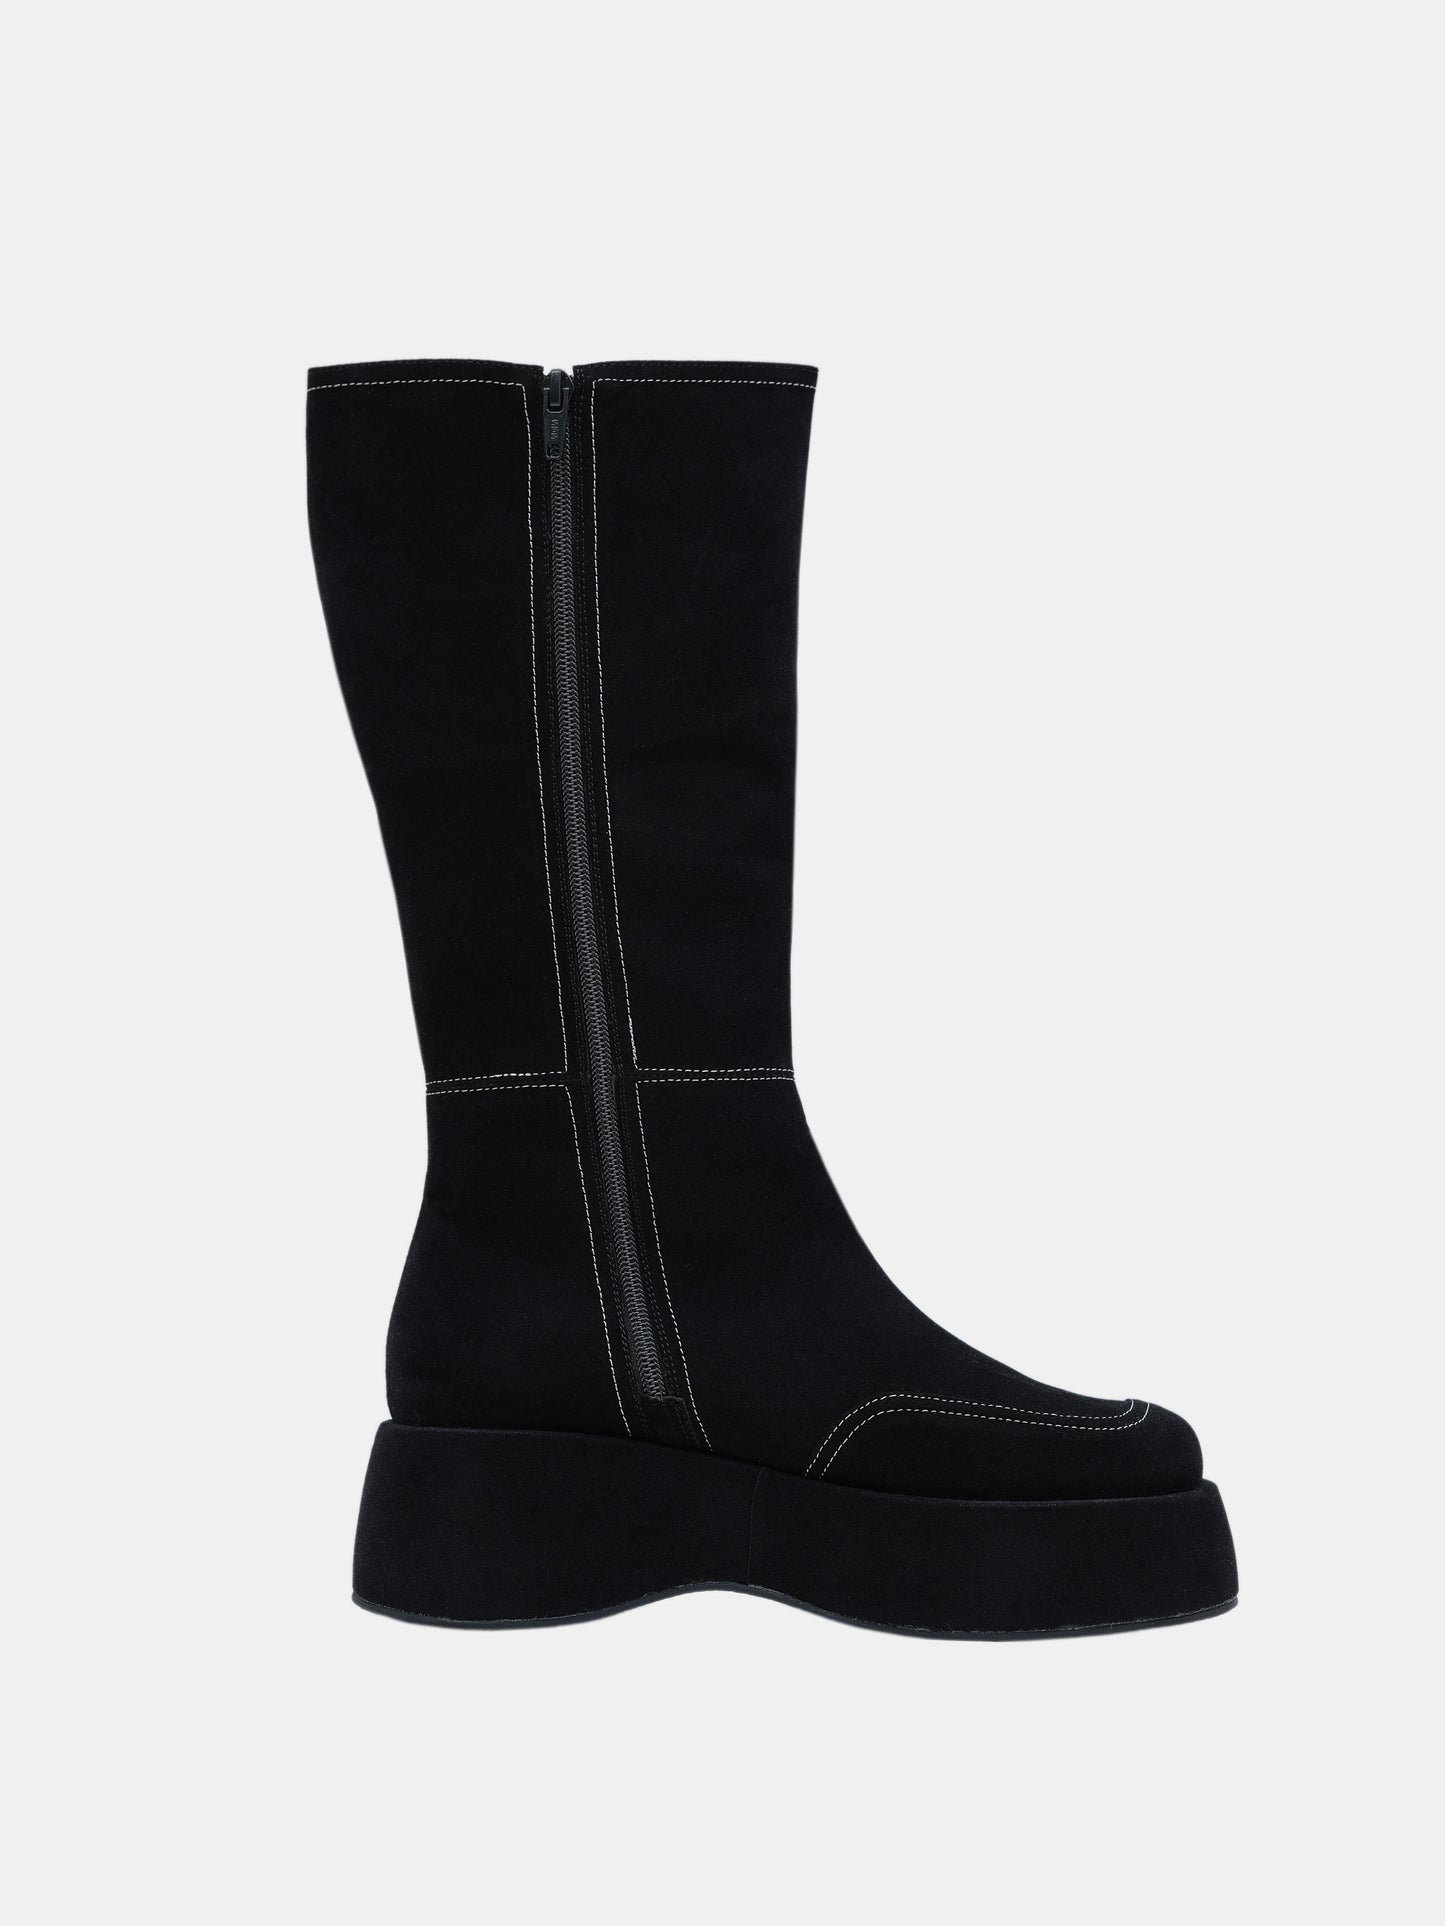 Suede Mid-Calf Boots, Black